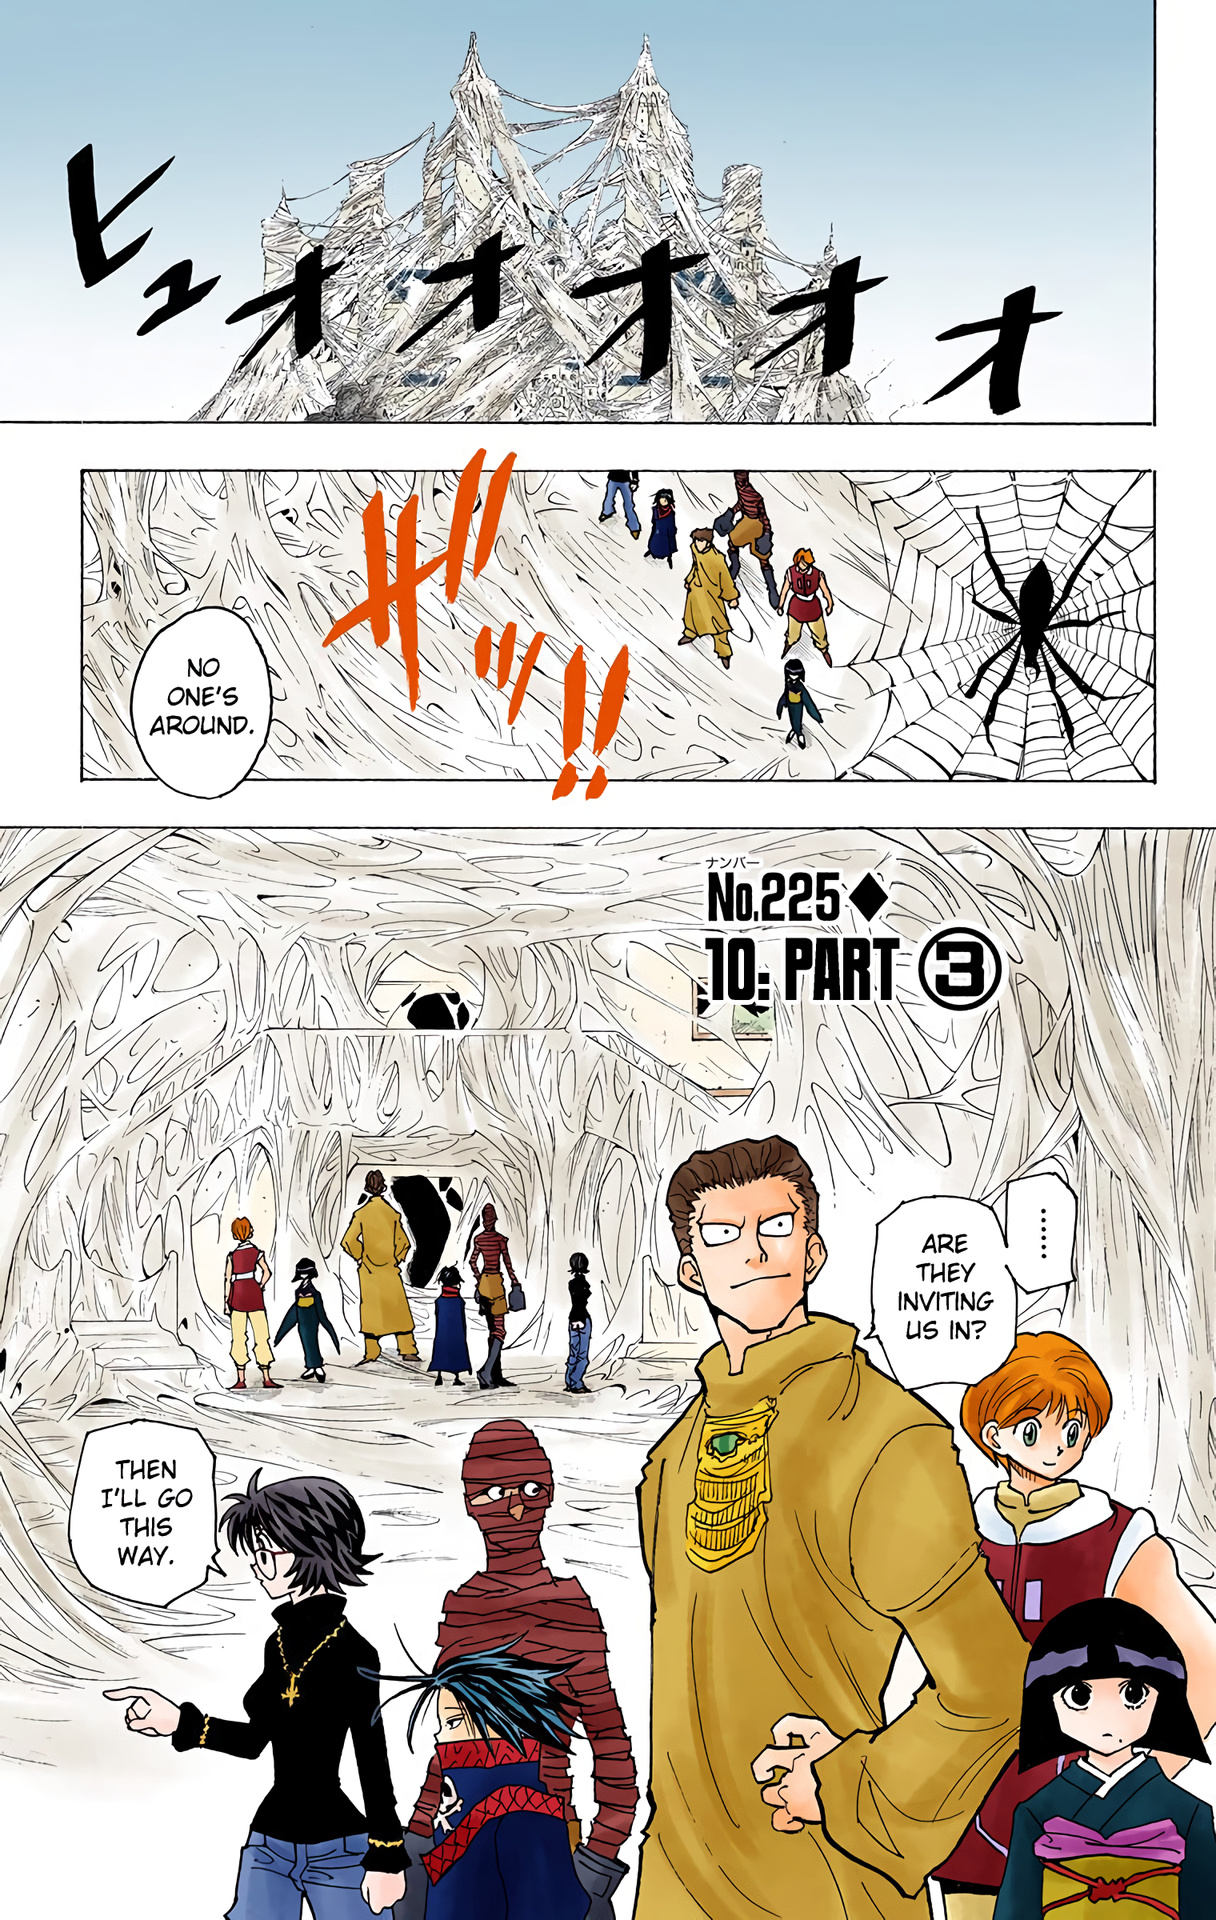 Hunter X Hunter Full Color Vol.22 Chapter 225: 10: Part 3 - Picture 1